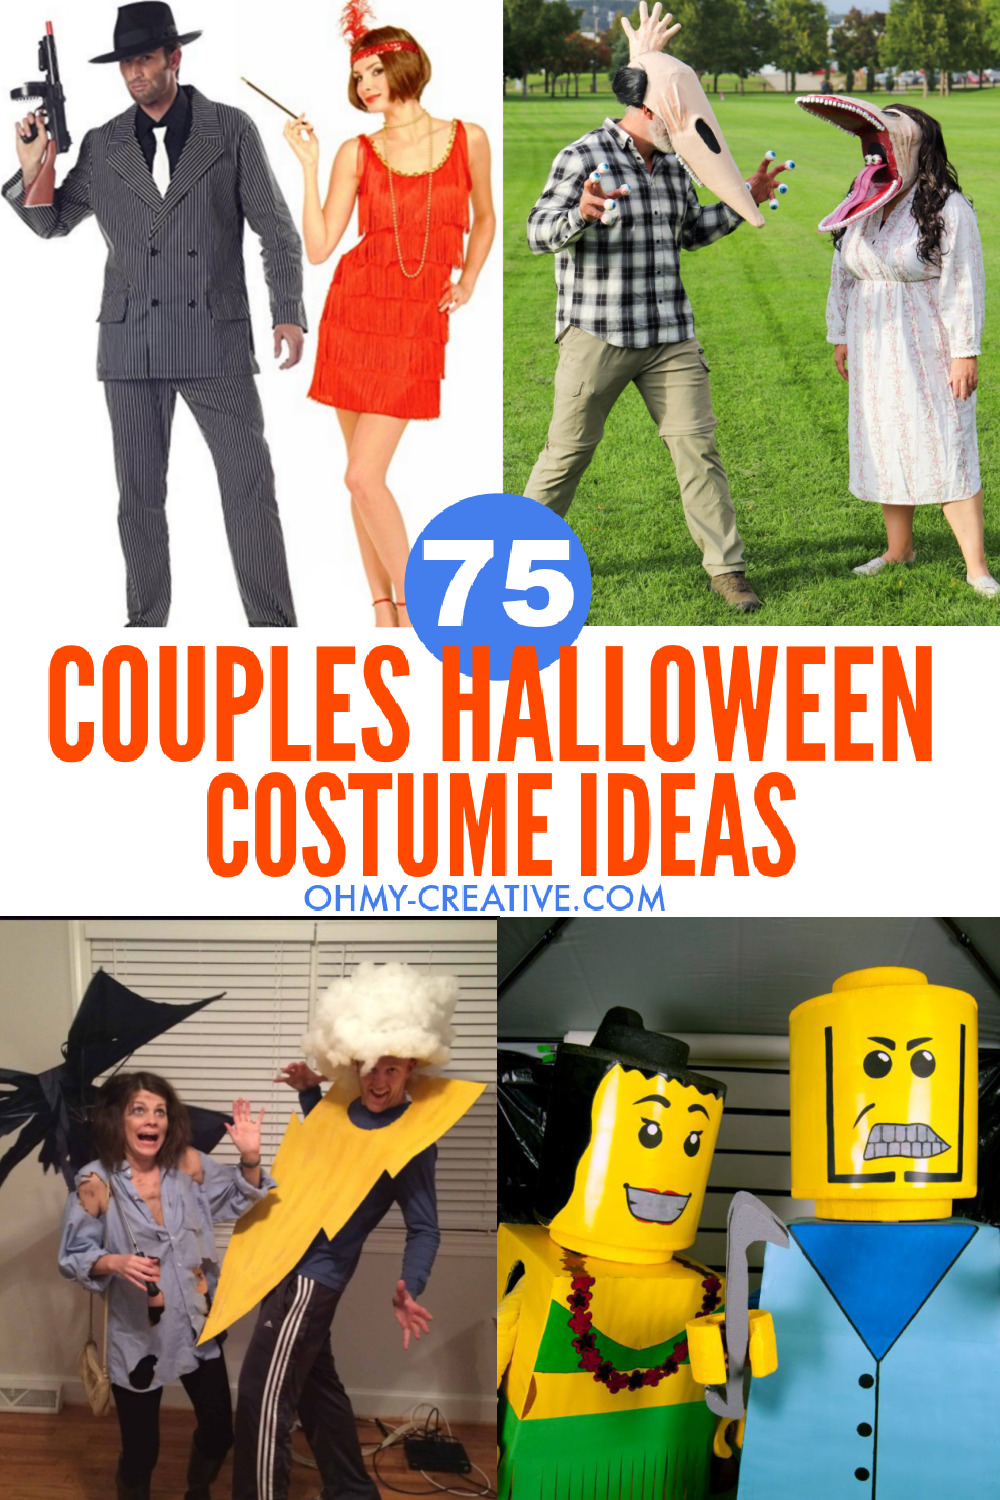 The best list of 75 awesome couples Halloween costume ideas. Whether you're looking for something funny, scary, or just plain cute, there's sure to be something on this list that you'll love.